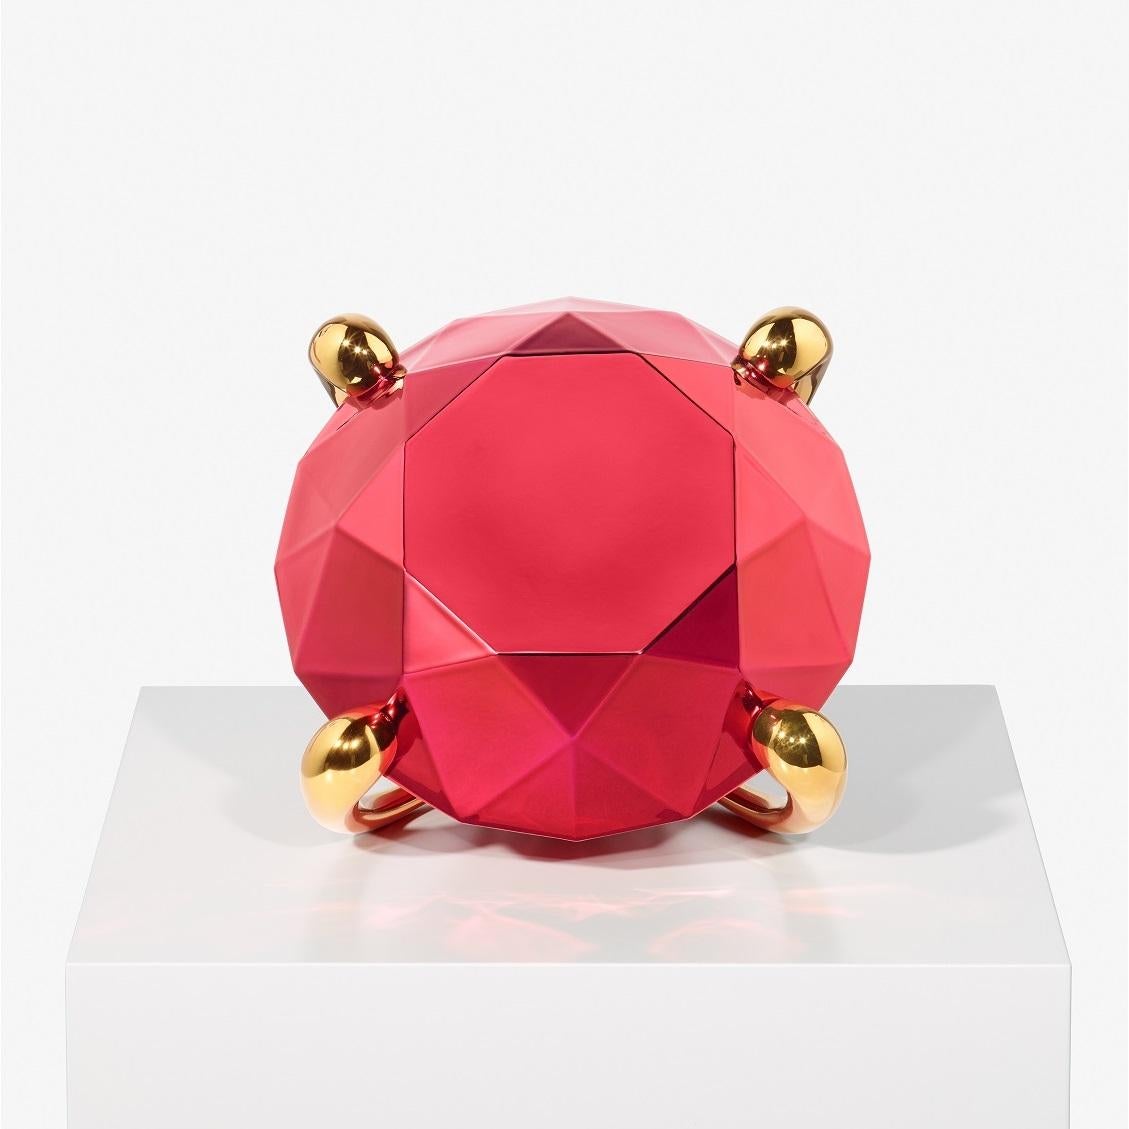 A reimagined iconography of the gemstone found in 
nature that becomes a vehicle to reflect upon 
consumerism and mass production.

Diamond (Red) - Jeff Koons, Contemporary, 21st Century, Sculpture, Limited Edition

Limoges porcelain with chromatic